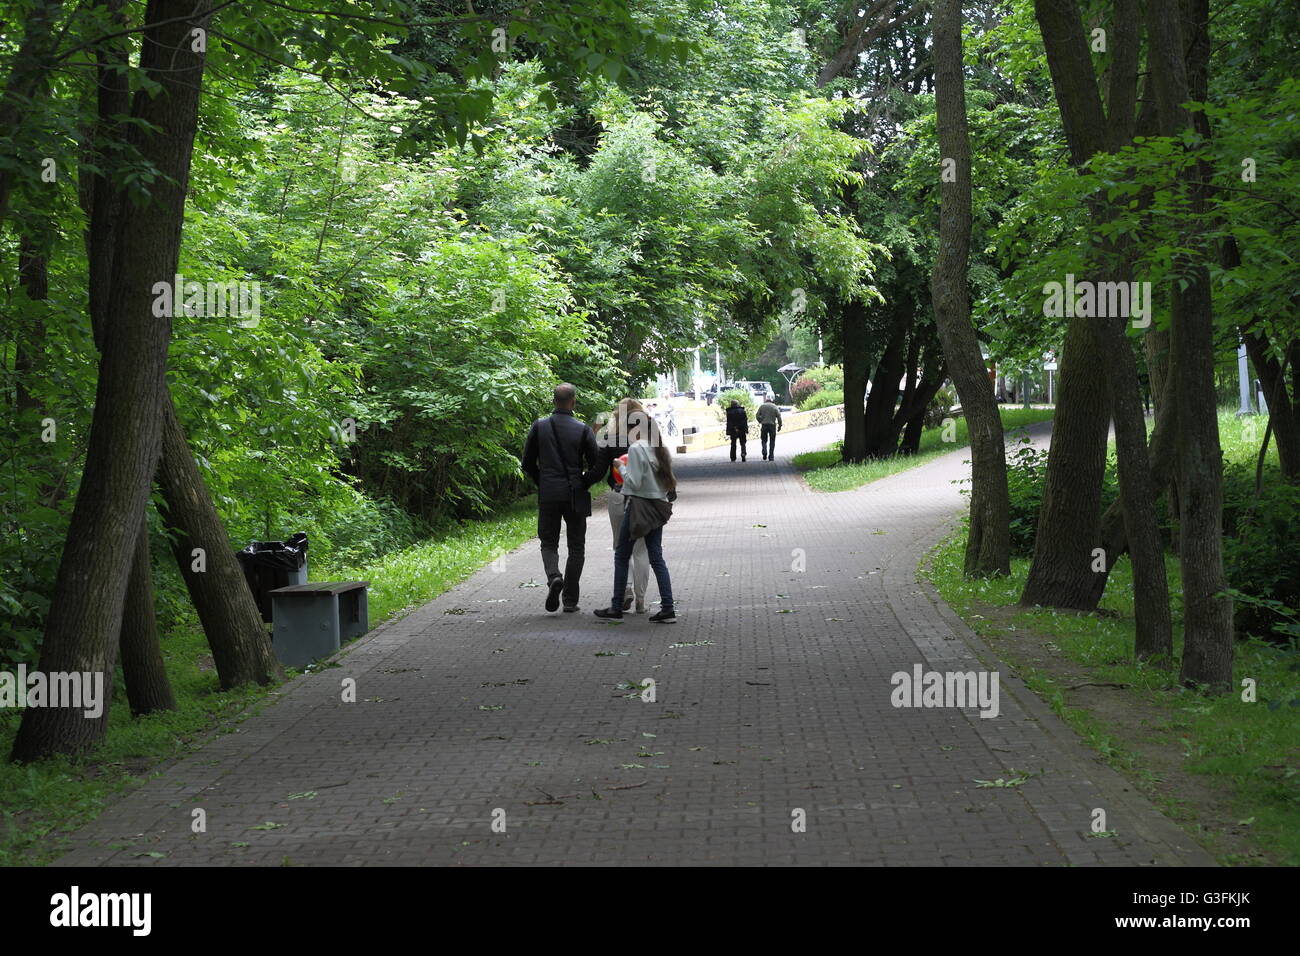 Gdansk, Poland 11th, June 2016 Sunny but cold Saturday in Gdansk, After few weeks of very warm weather, today temperature dropped to 14 Celsius degrees. Cooling sensation is intensified by a strong northern wind. People walking in park near the Brzezno beach are seen. Credit:  Michal Fludra/Alamy Live News Stock Photo